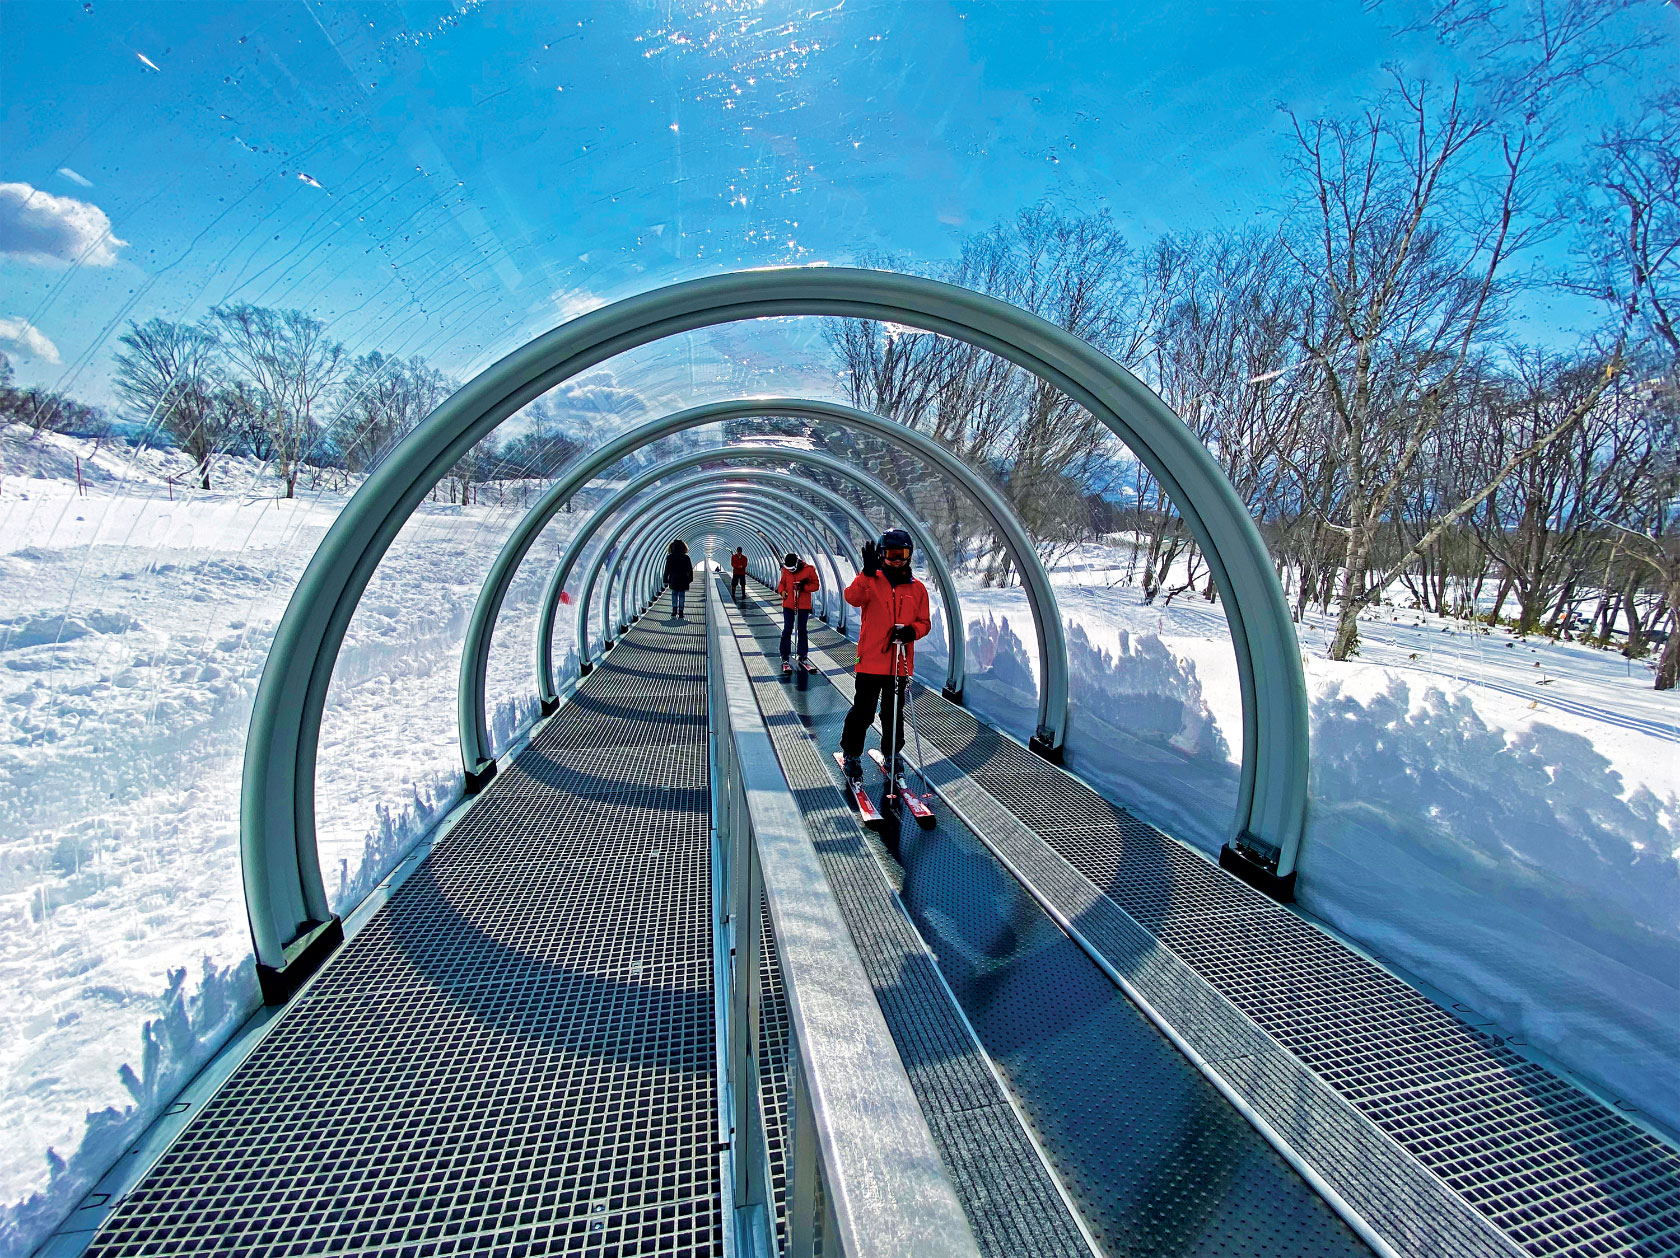 Skiers in a covered conveyor belt ski lift